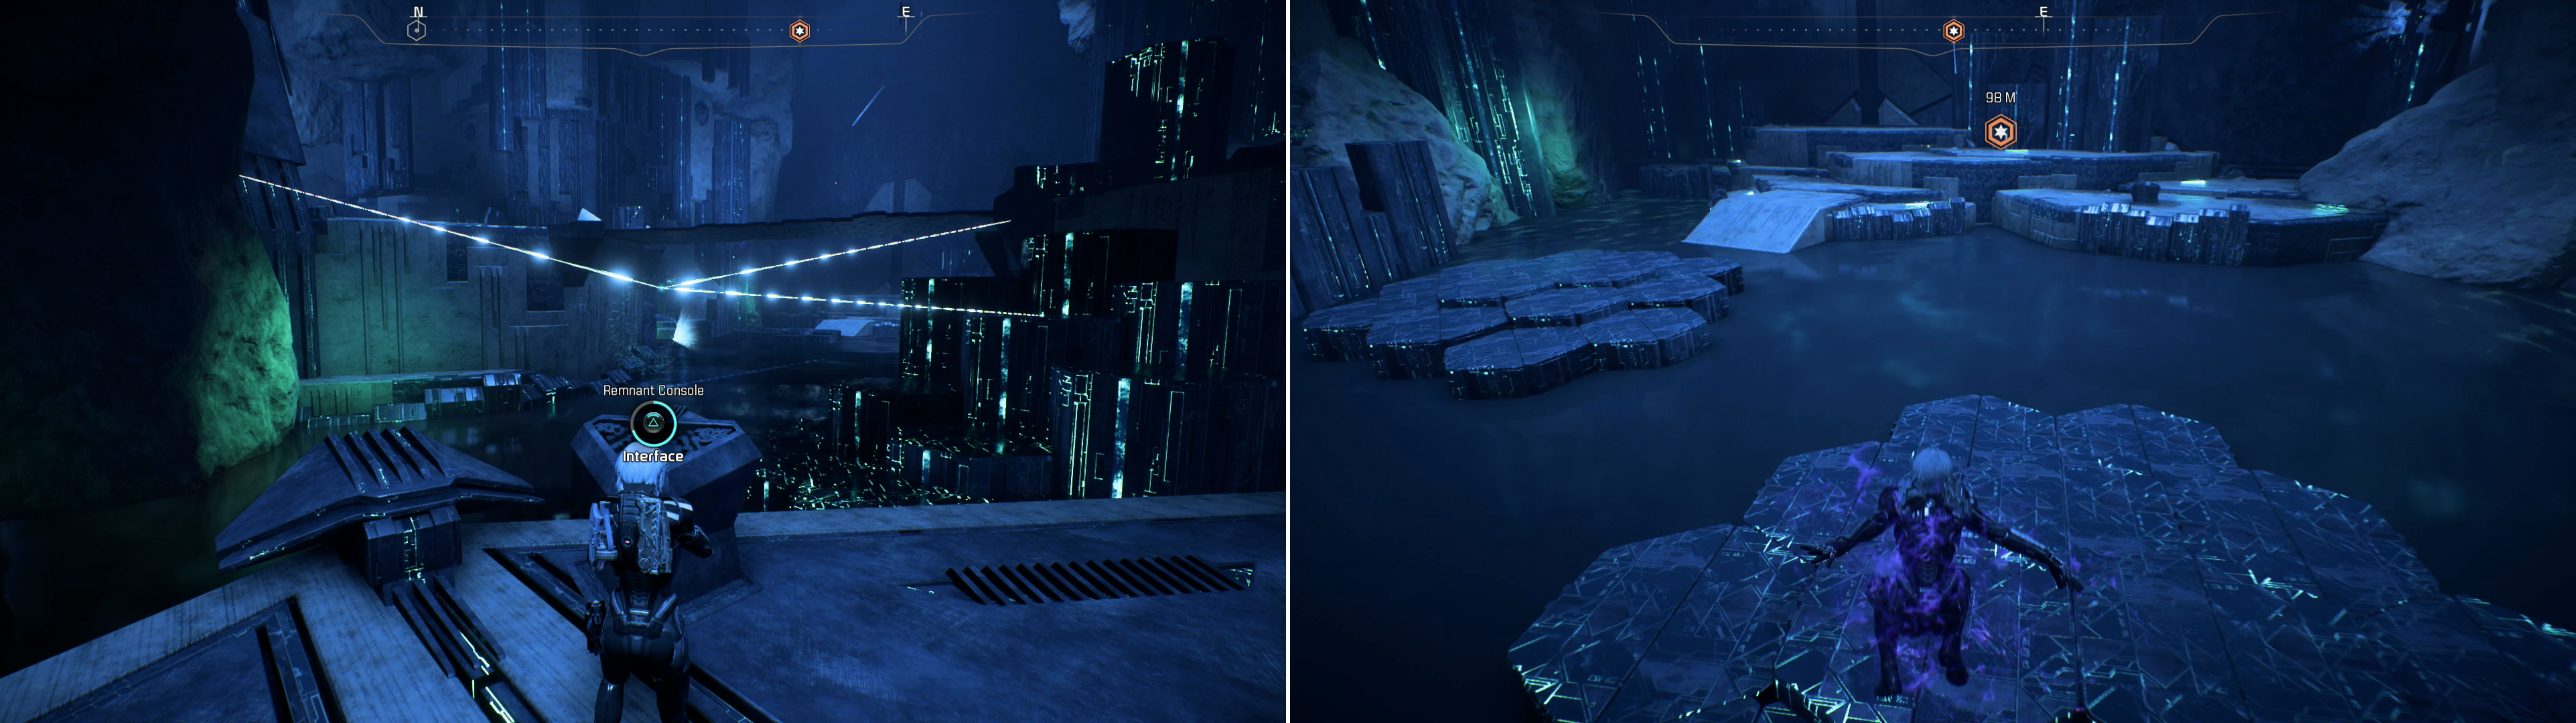 Return to the beginning of the vault and activate the previously ignored Remnant Console (left) then leap across the “lily pad” platforms deployed by aforementioned console (right).